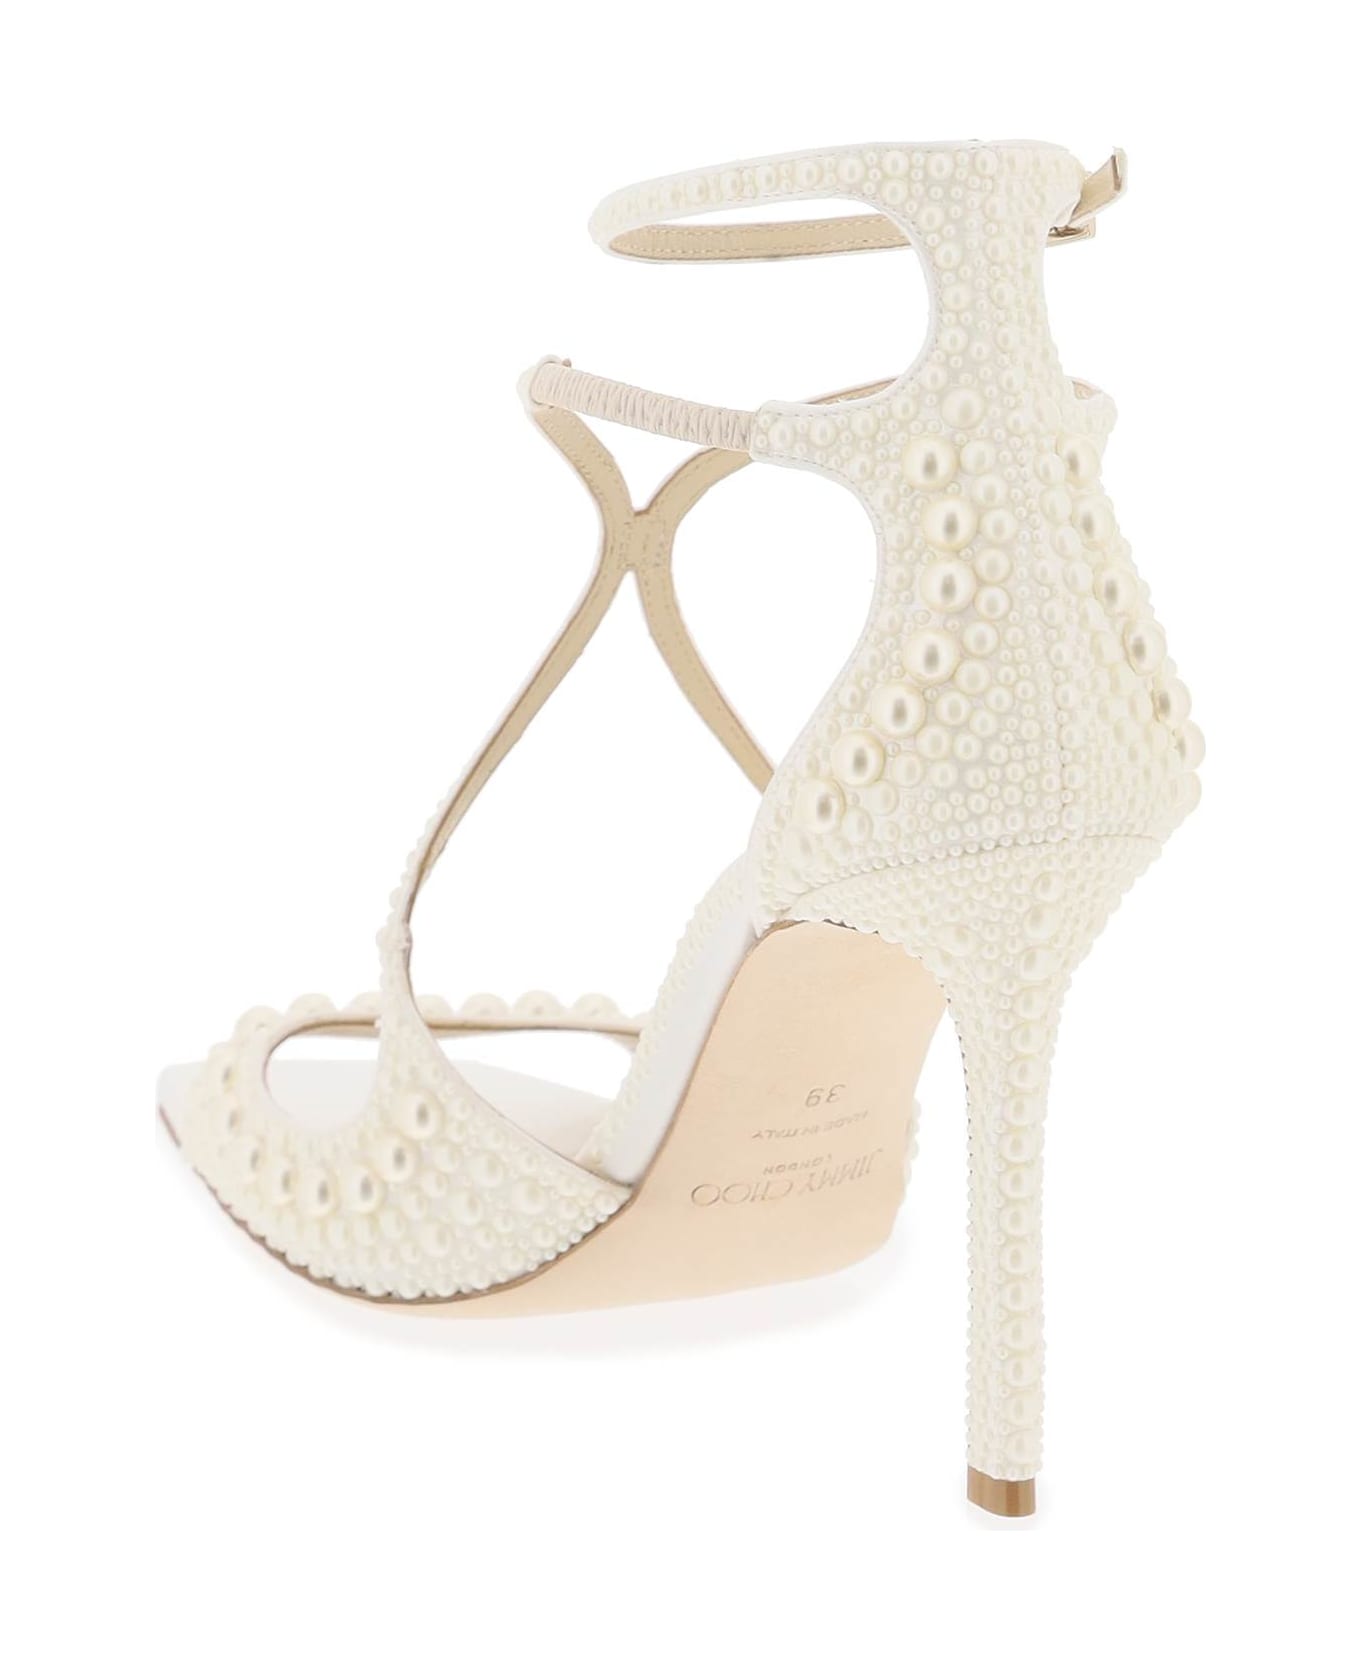 Jimmy Choo Azia 95 Sandals With Pearls - WHITE WHITE (Black)